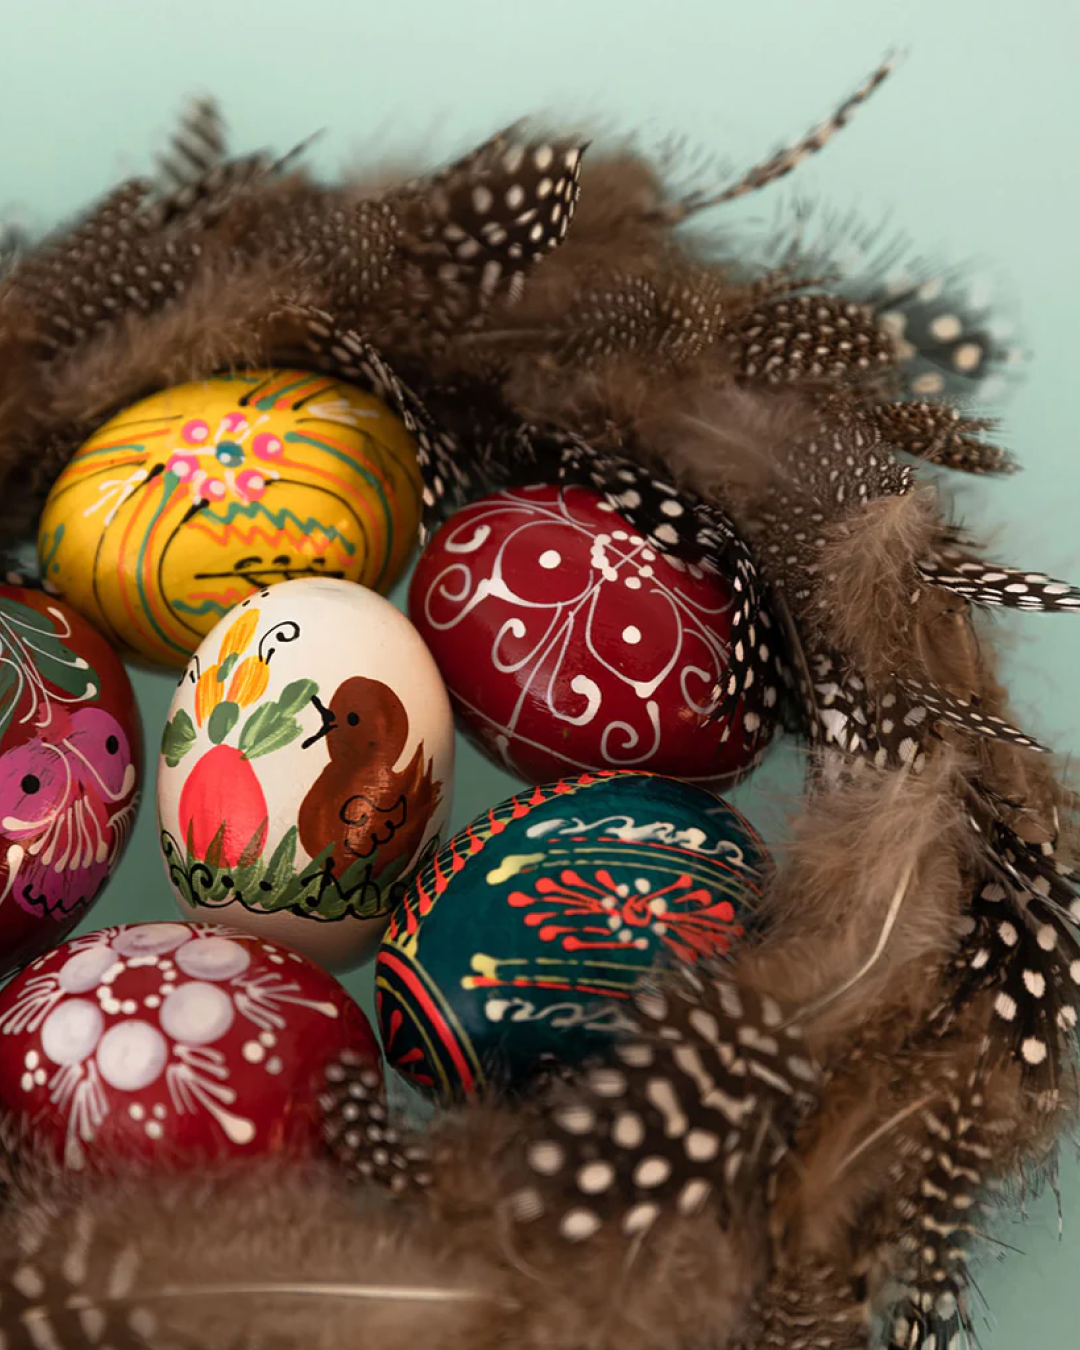 Assorted decorated eggs with bird feathers